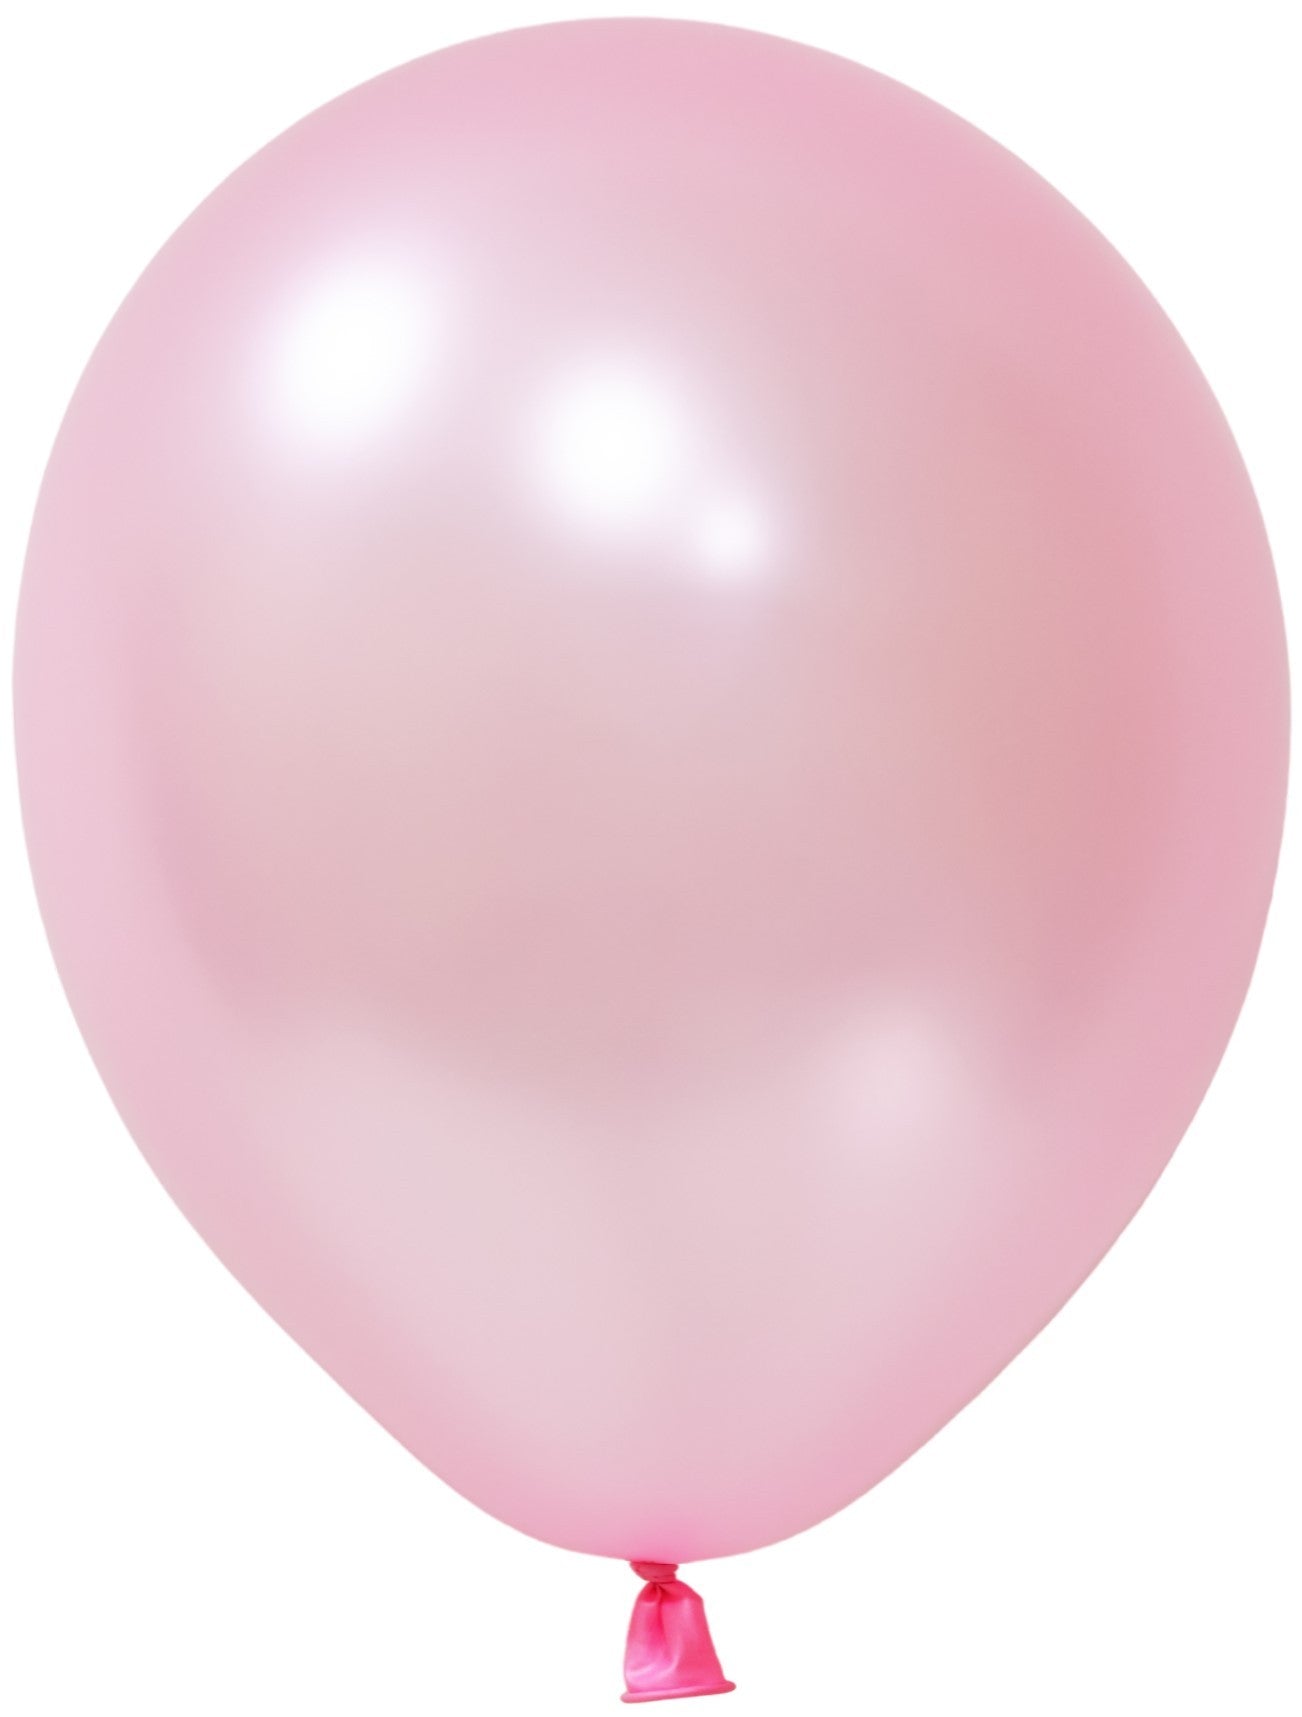 View Pink Metallic Latex Balloon 10 inch Pack of 100 information